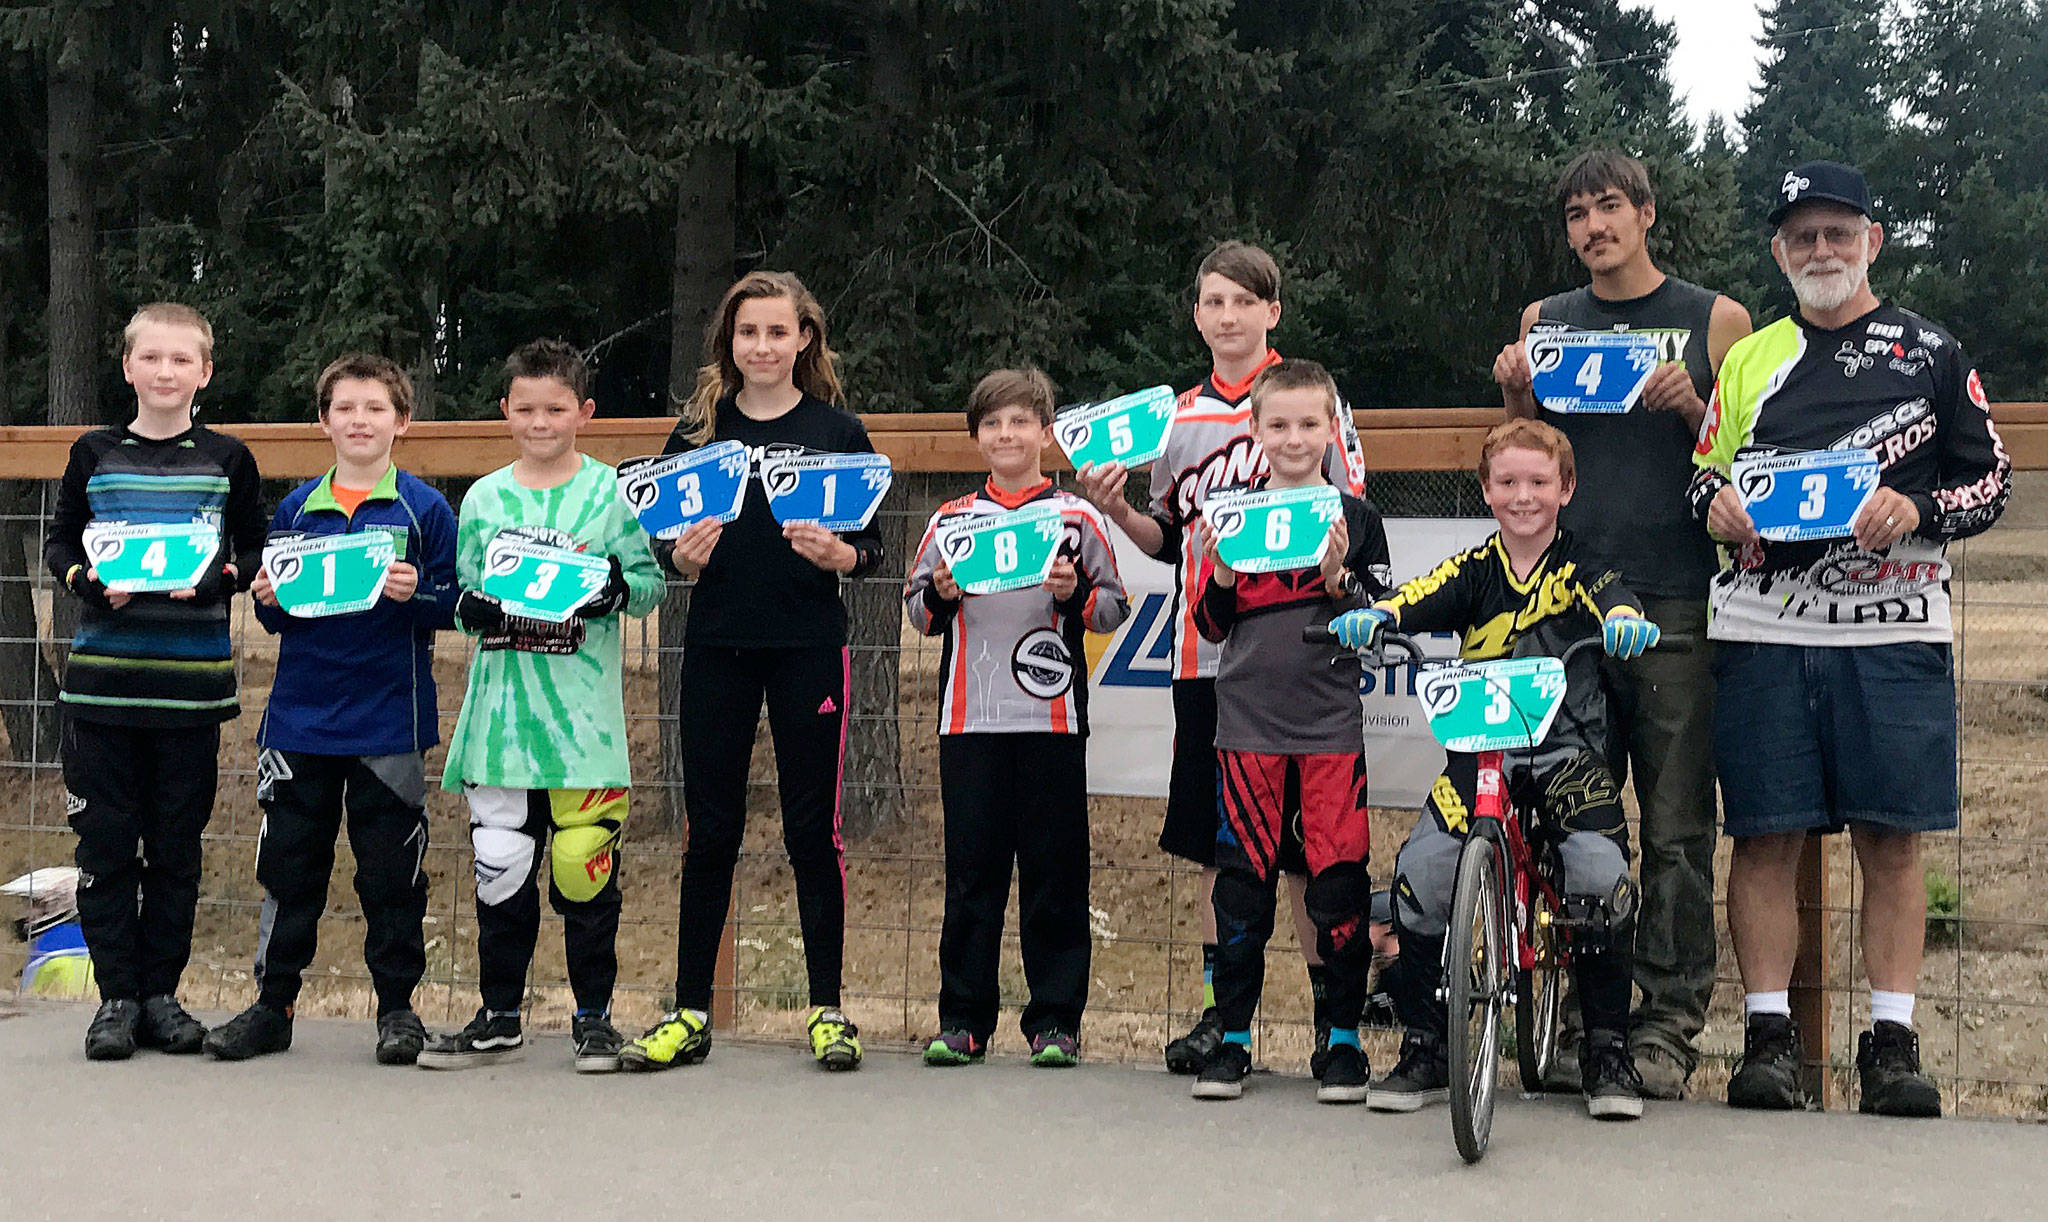 BMX riders vie for top spots at state event